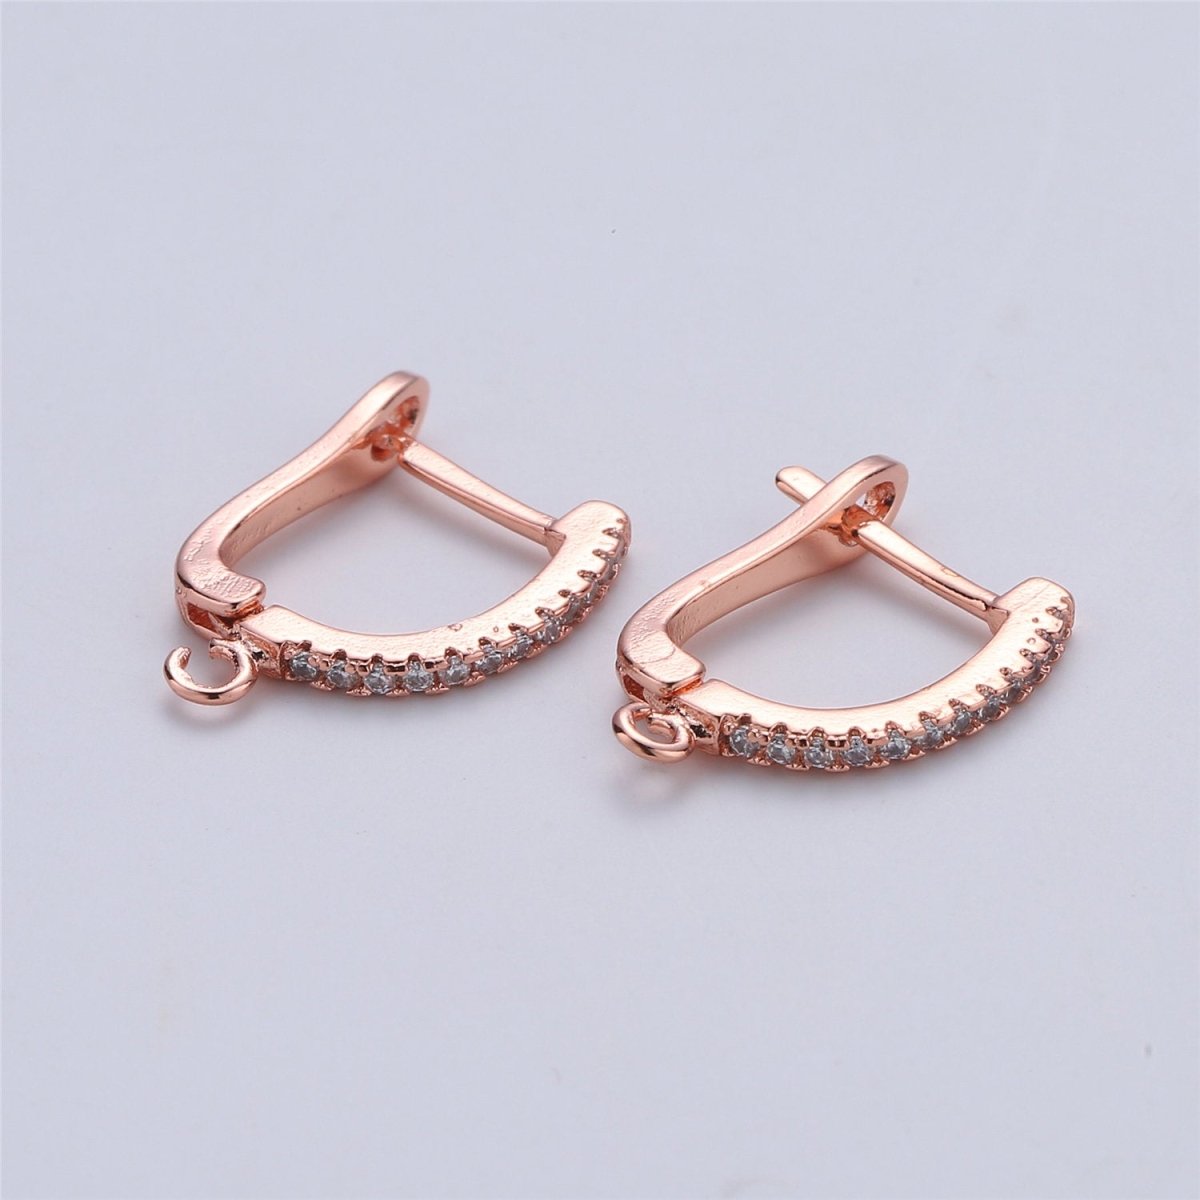 15mm Cubic one touch Earring w/ open link for Charm Rose Gold Silver Gold 18K gold Filled Lead, Nickel free, Lever back earring supply K-167 K-166 - DLUXCA